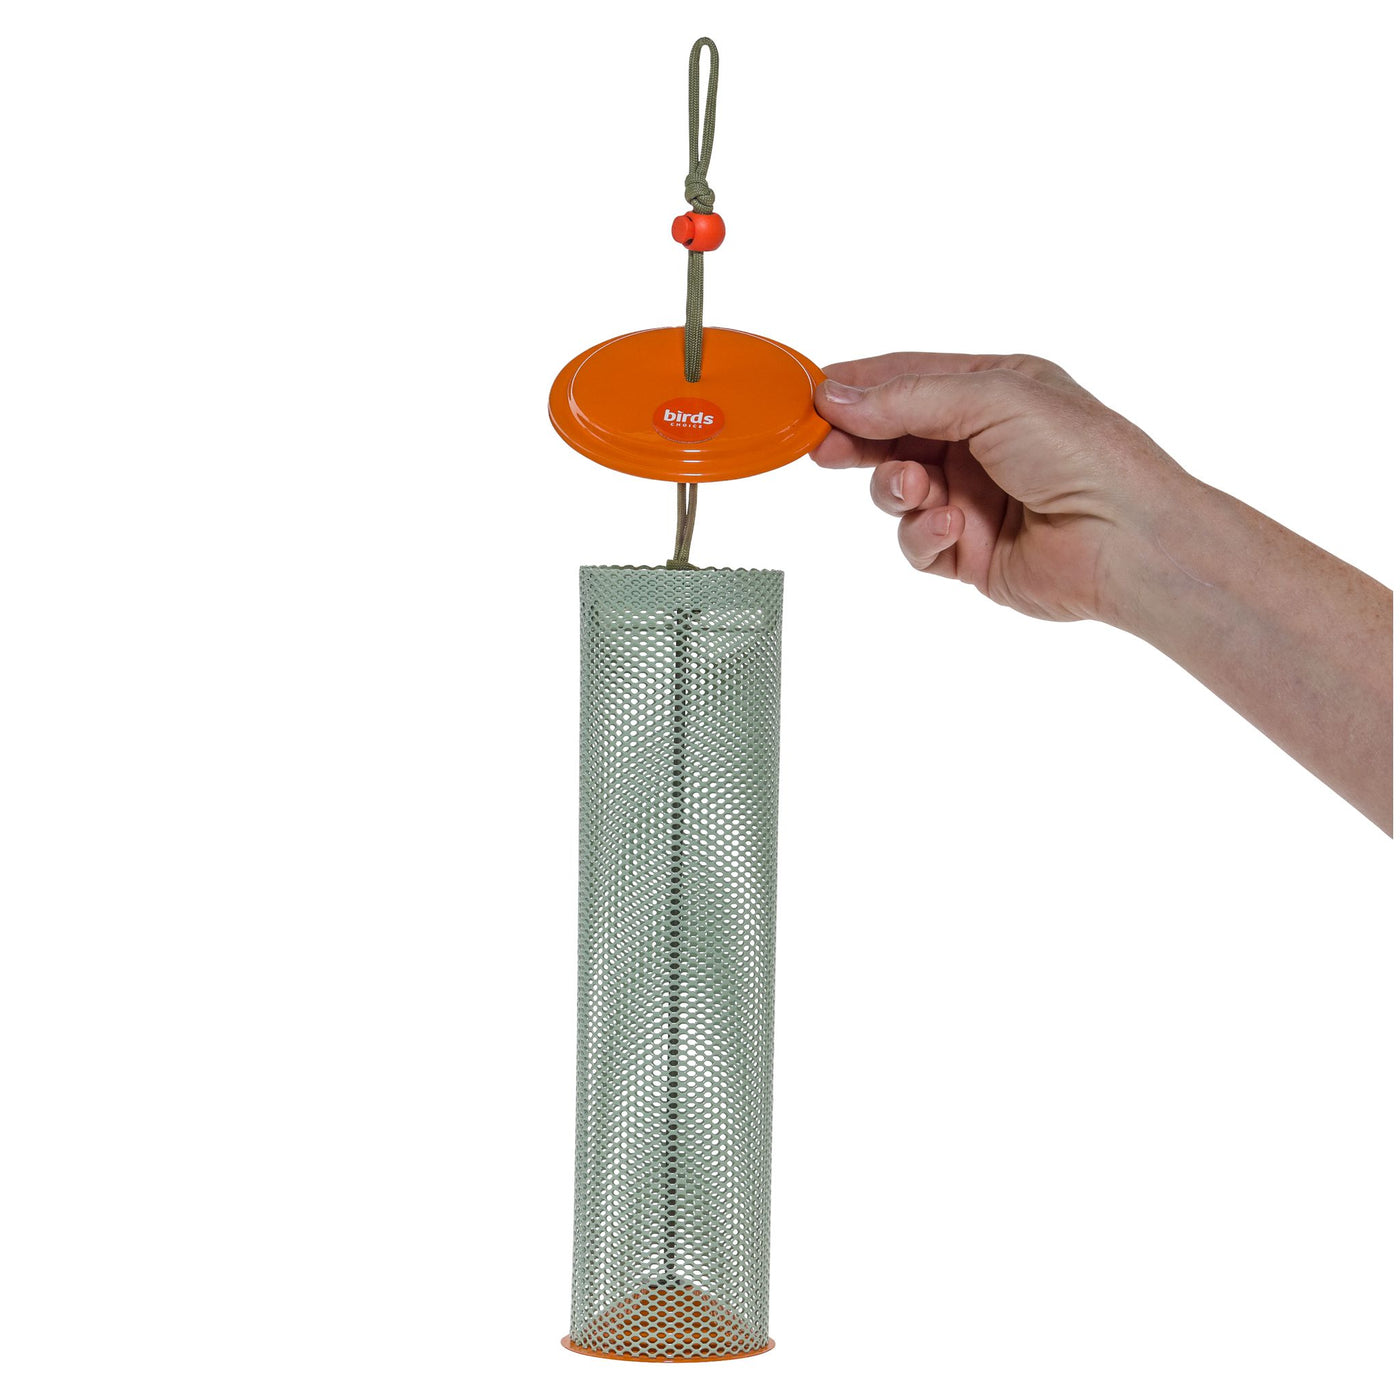 Magnet Mesh Tube Feeder Color Pop Collection for Finches in Light Green and Orange - Birds Choice